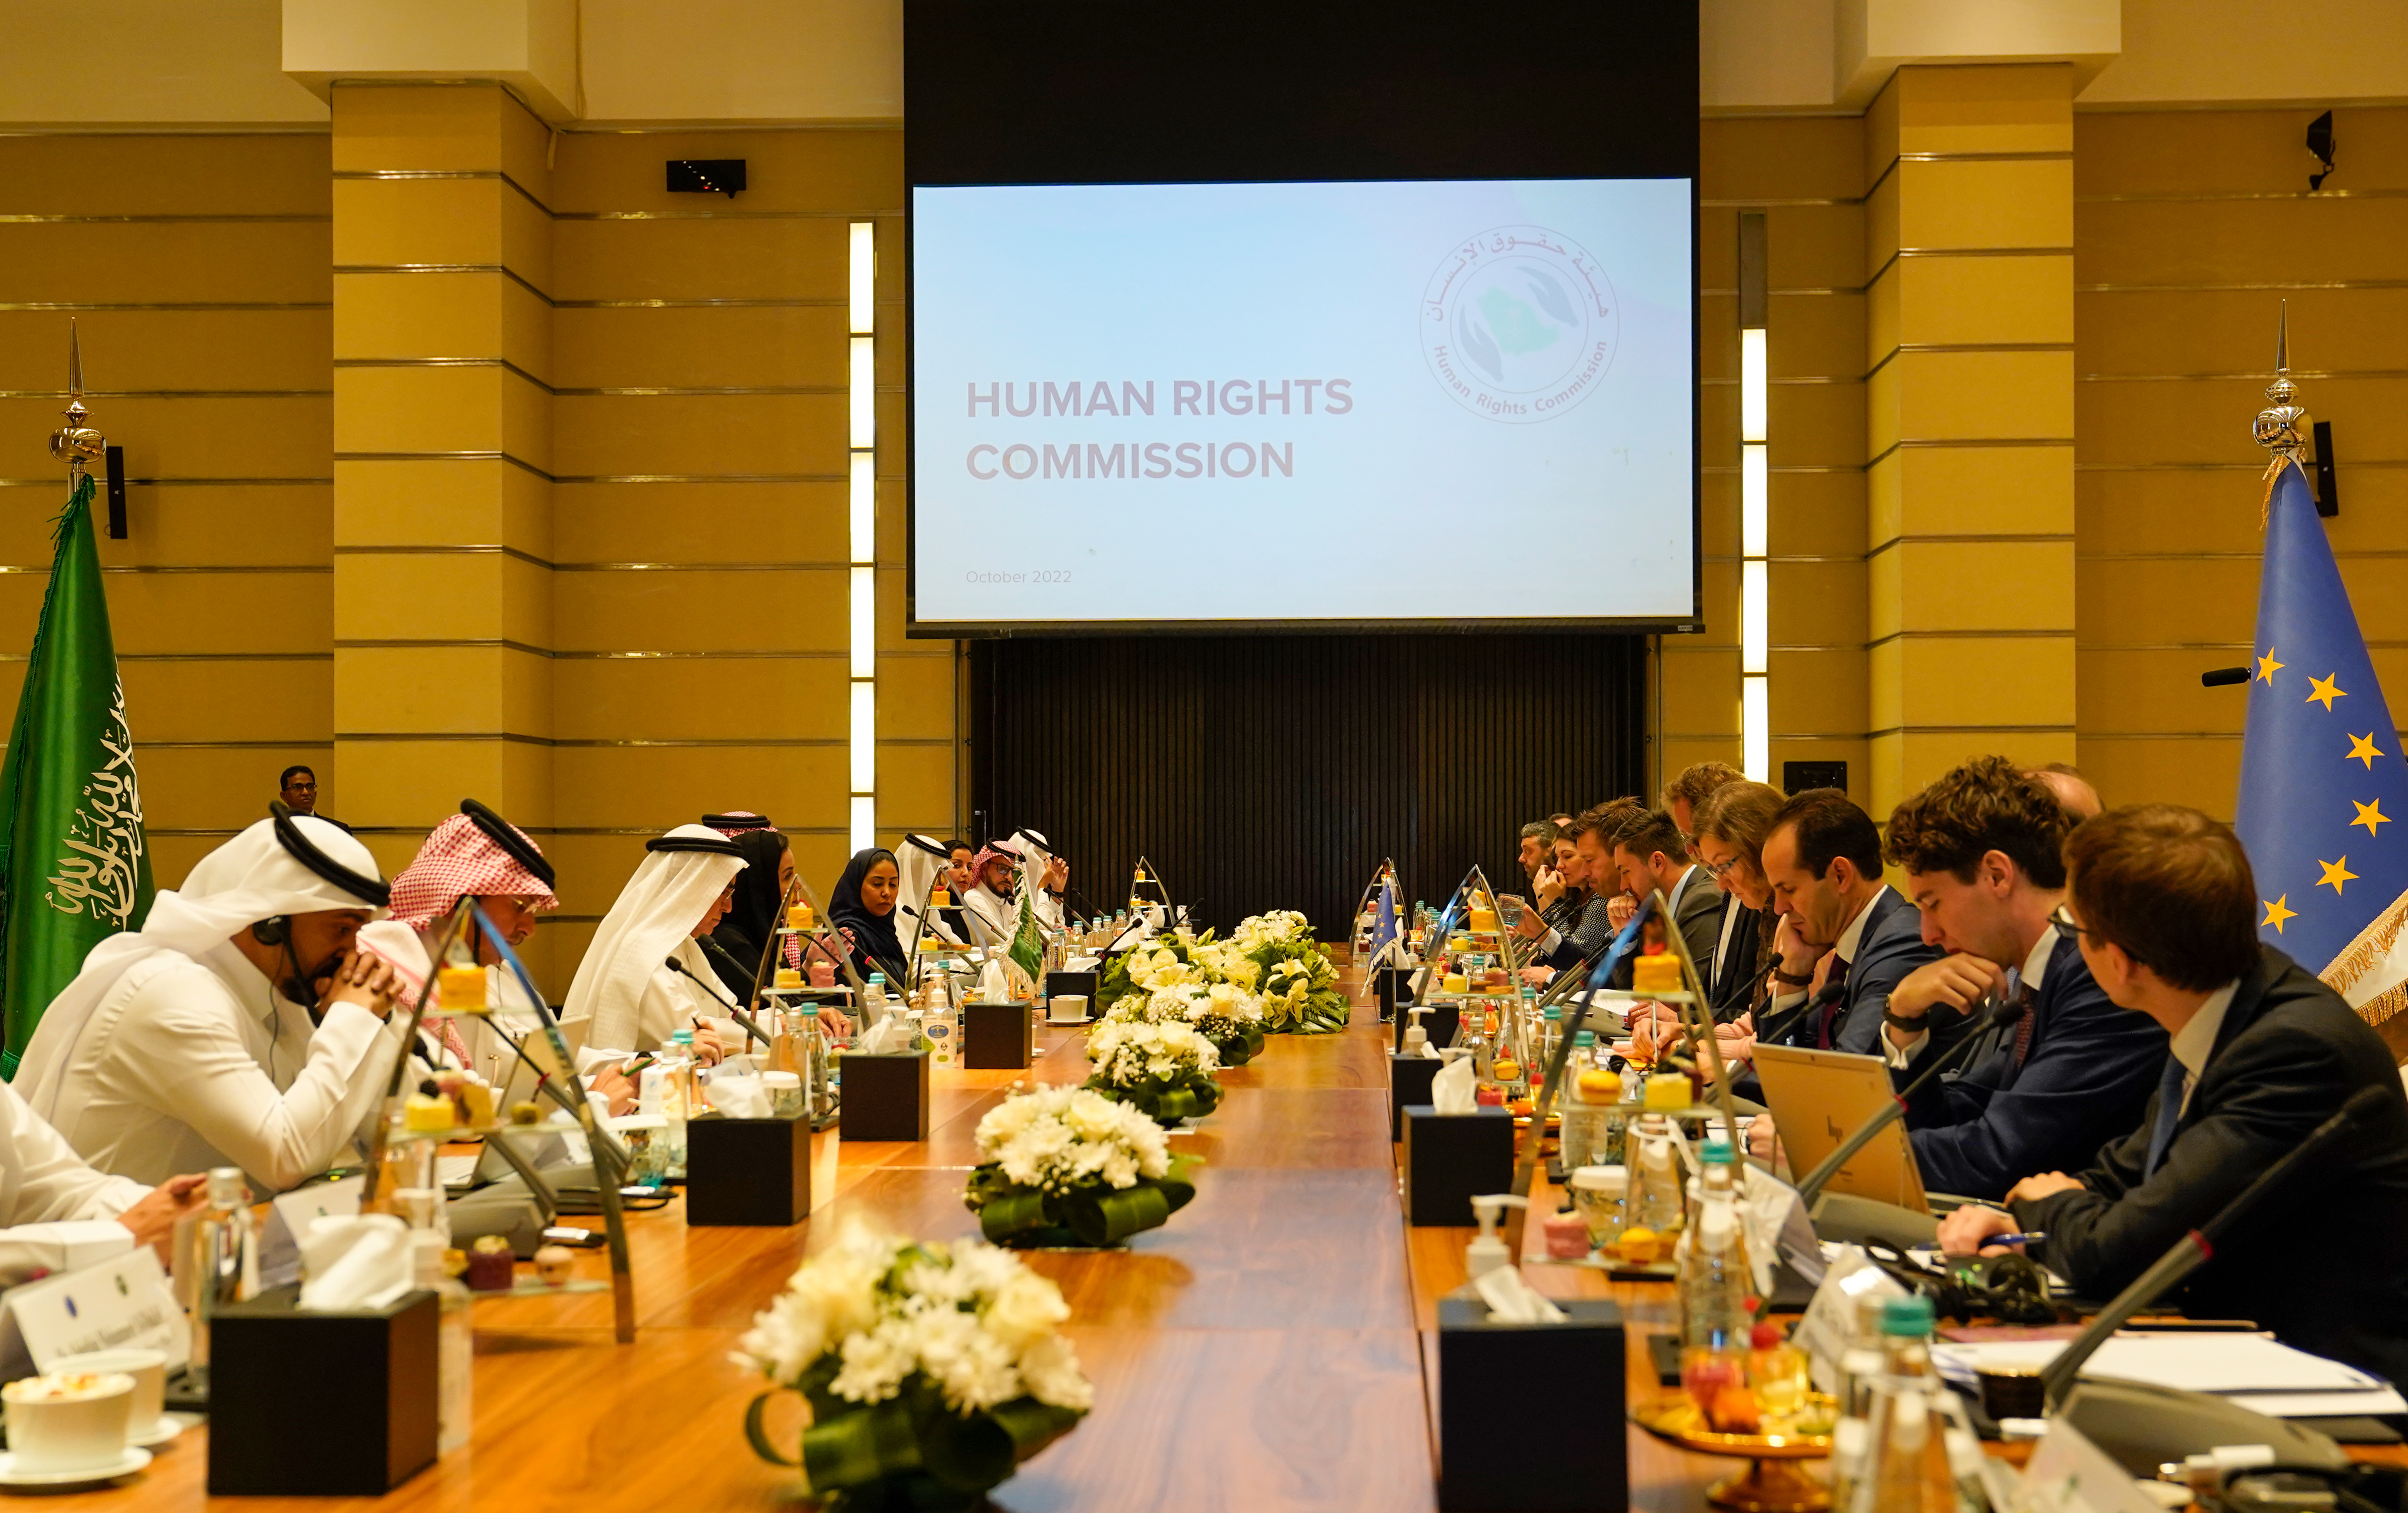 During her meeting with the M.E. and GCC Working Group Affiliated with the European Council, H.E. Chairman of HRC Dr. Hala Al-Tuwaijri highlighted the Kingdom's efforts and reforms in human rights.